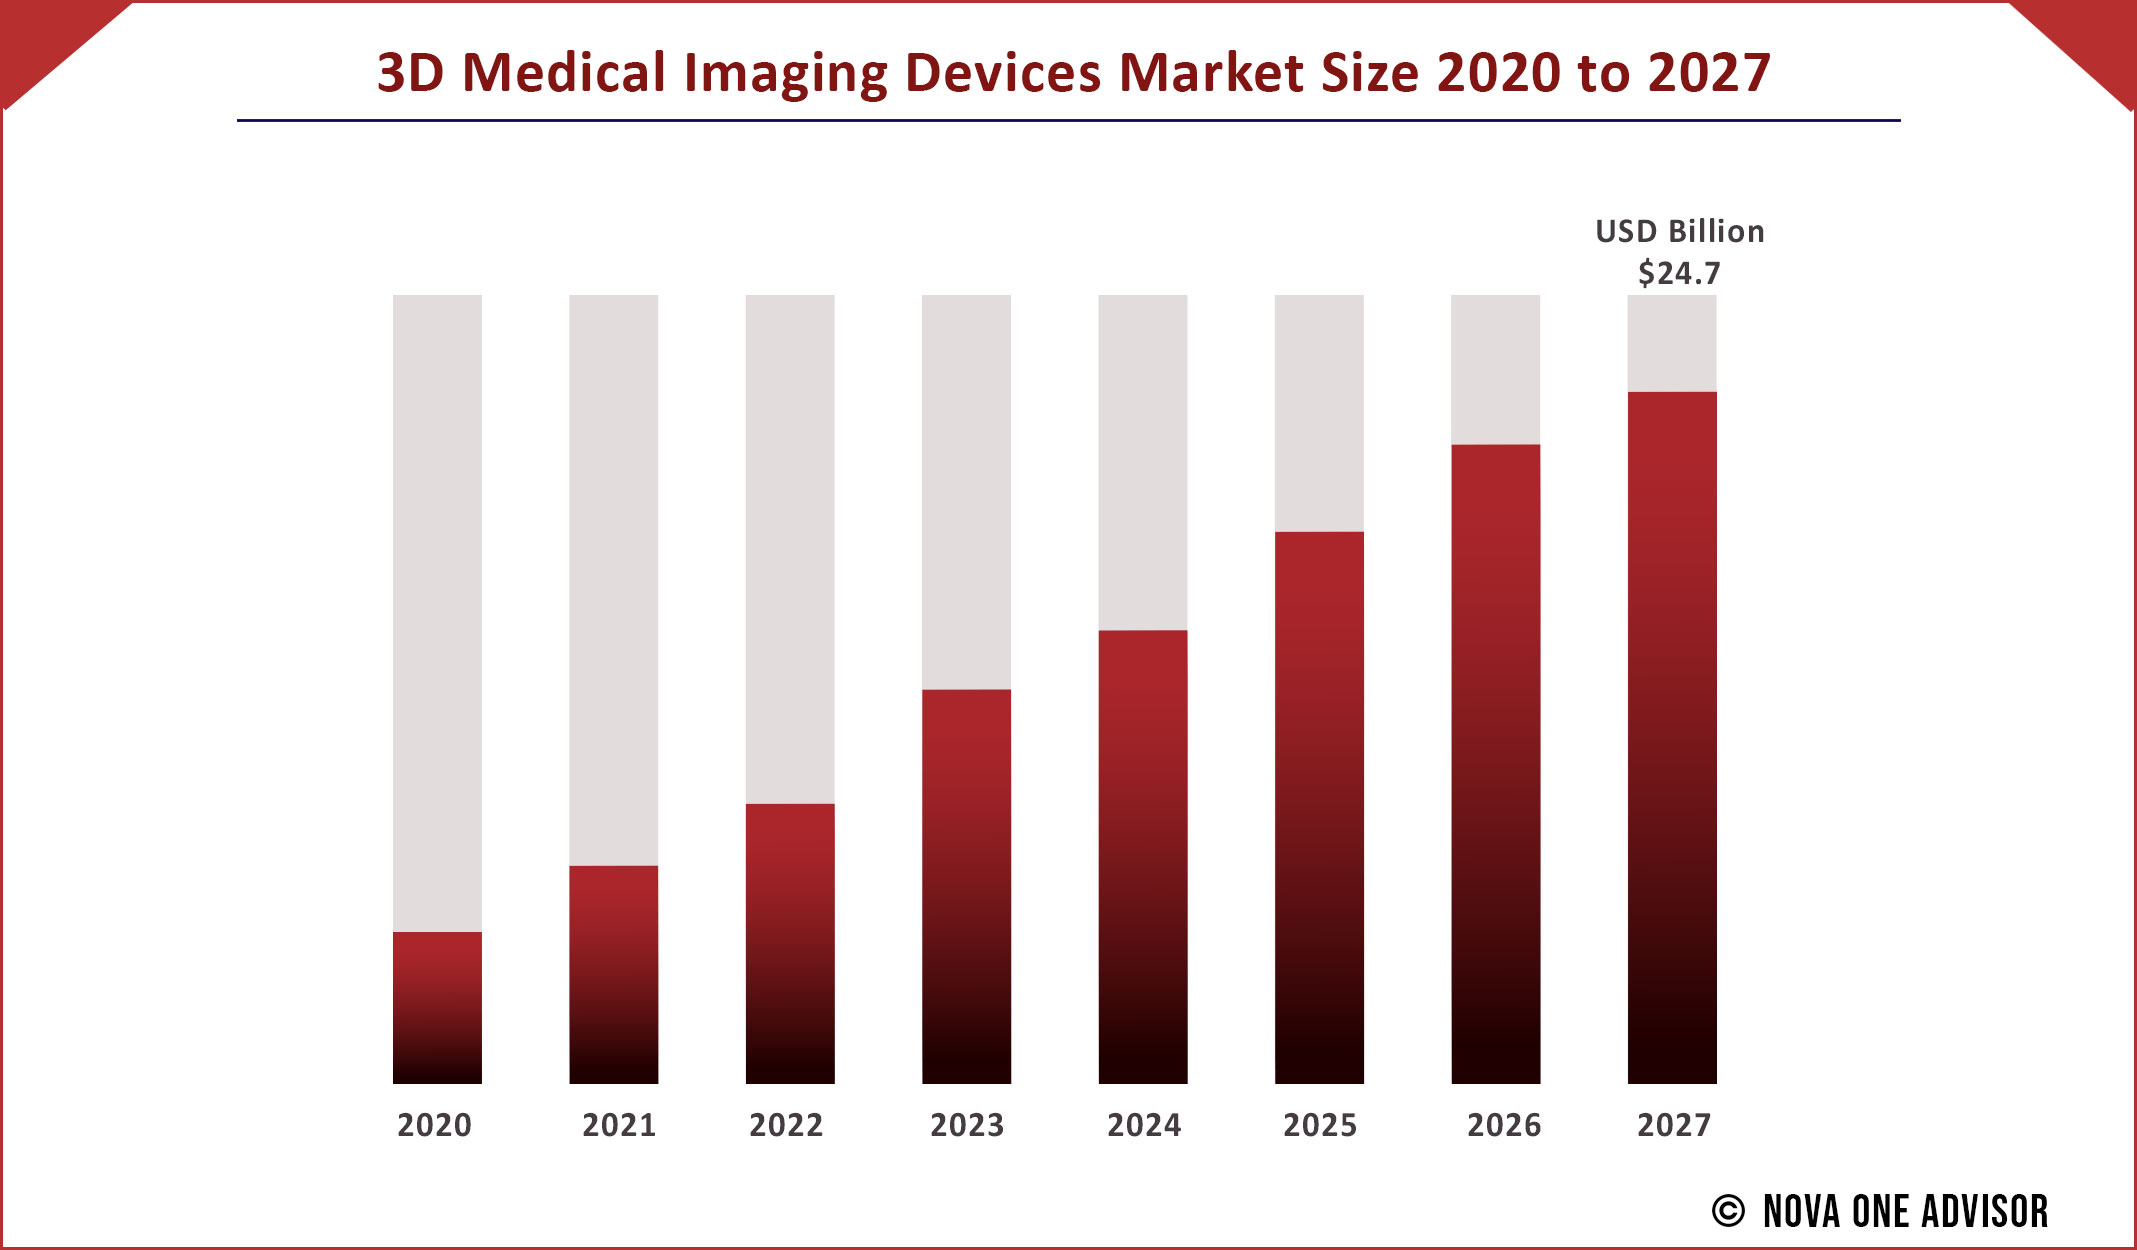 3D Medical Imaging Devices Market Size 2020 to 2027